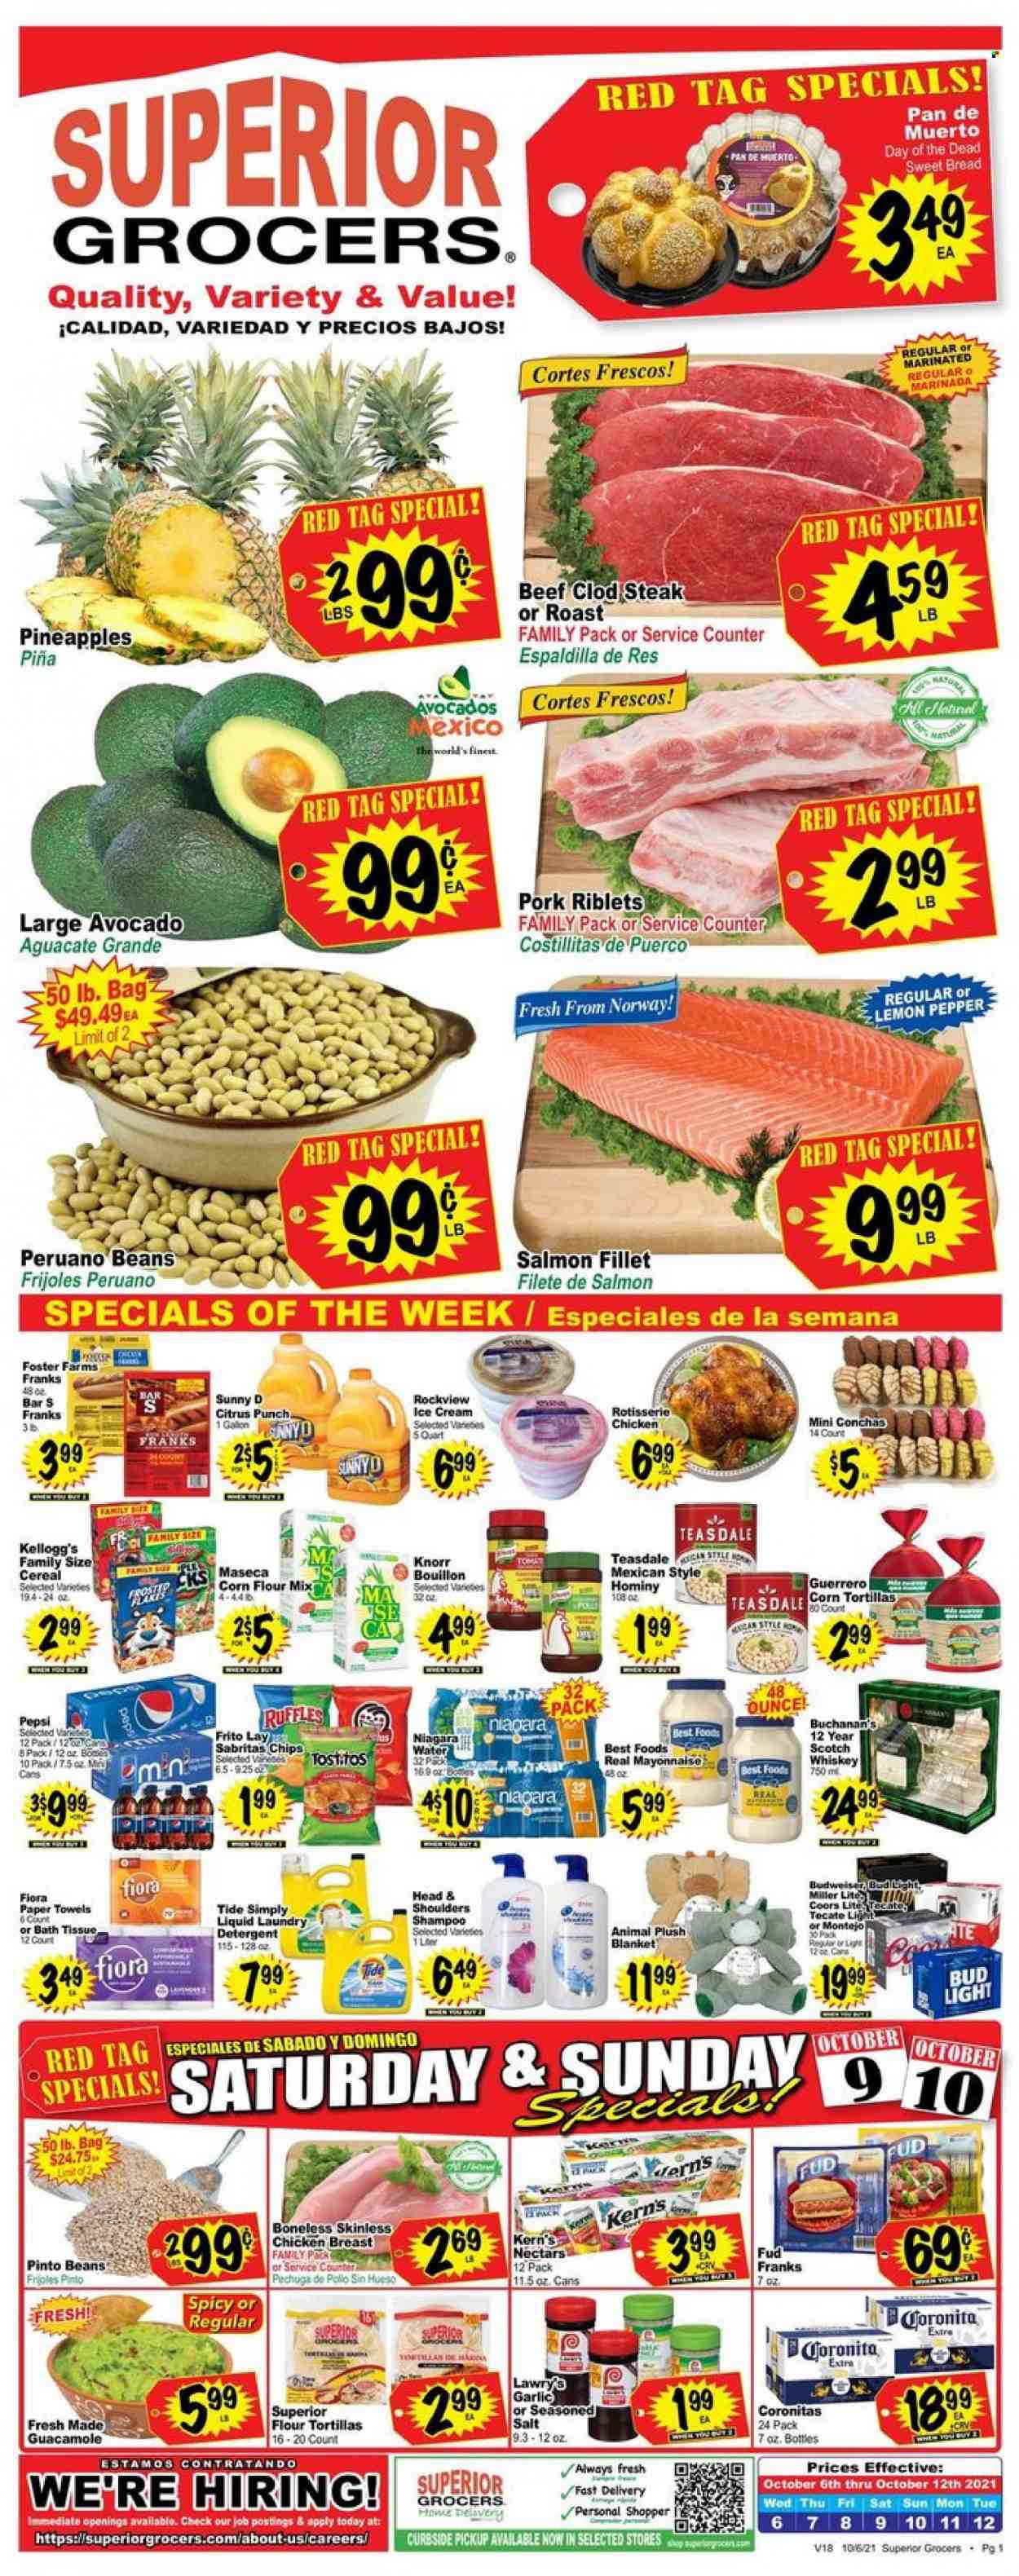 Superior Grocers ad  - 10.06.2021 - 10.12.2021.